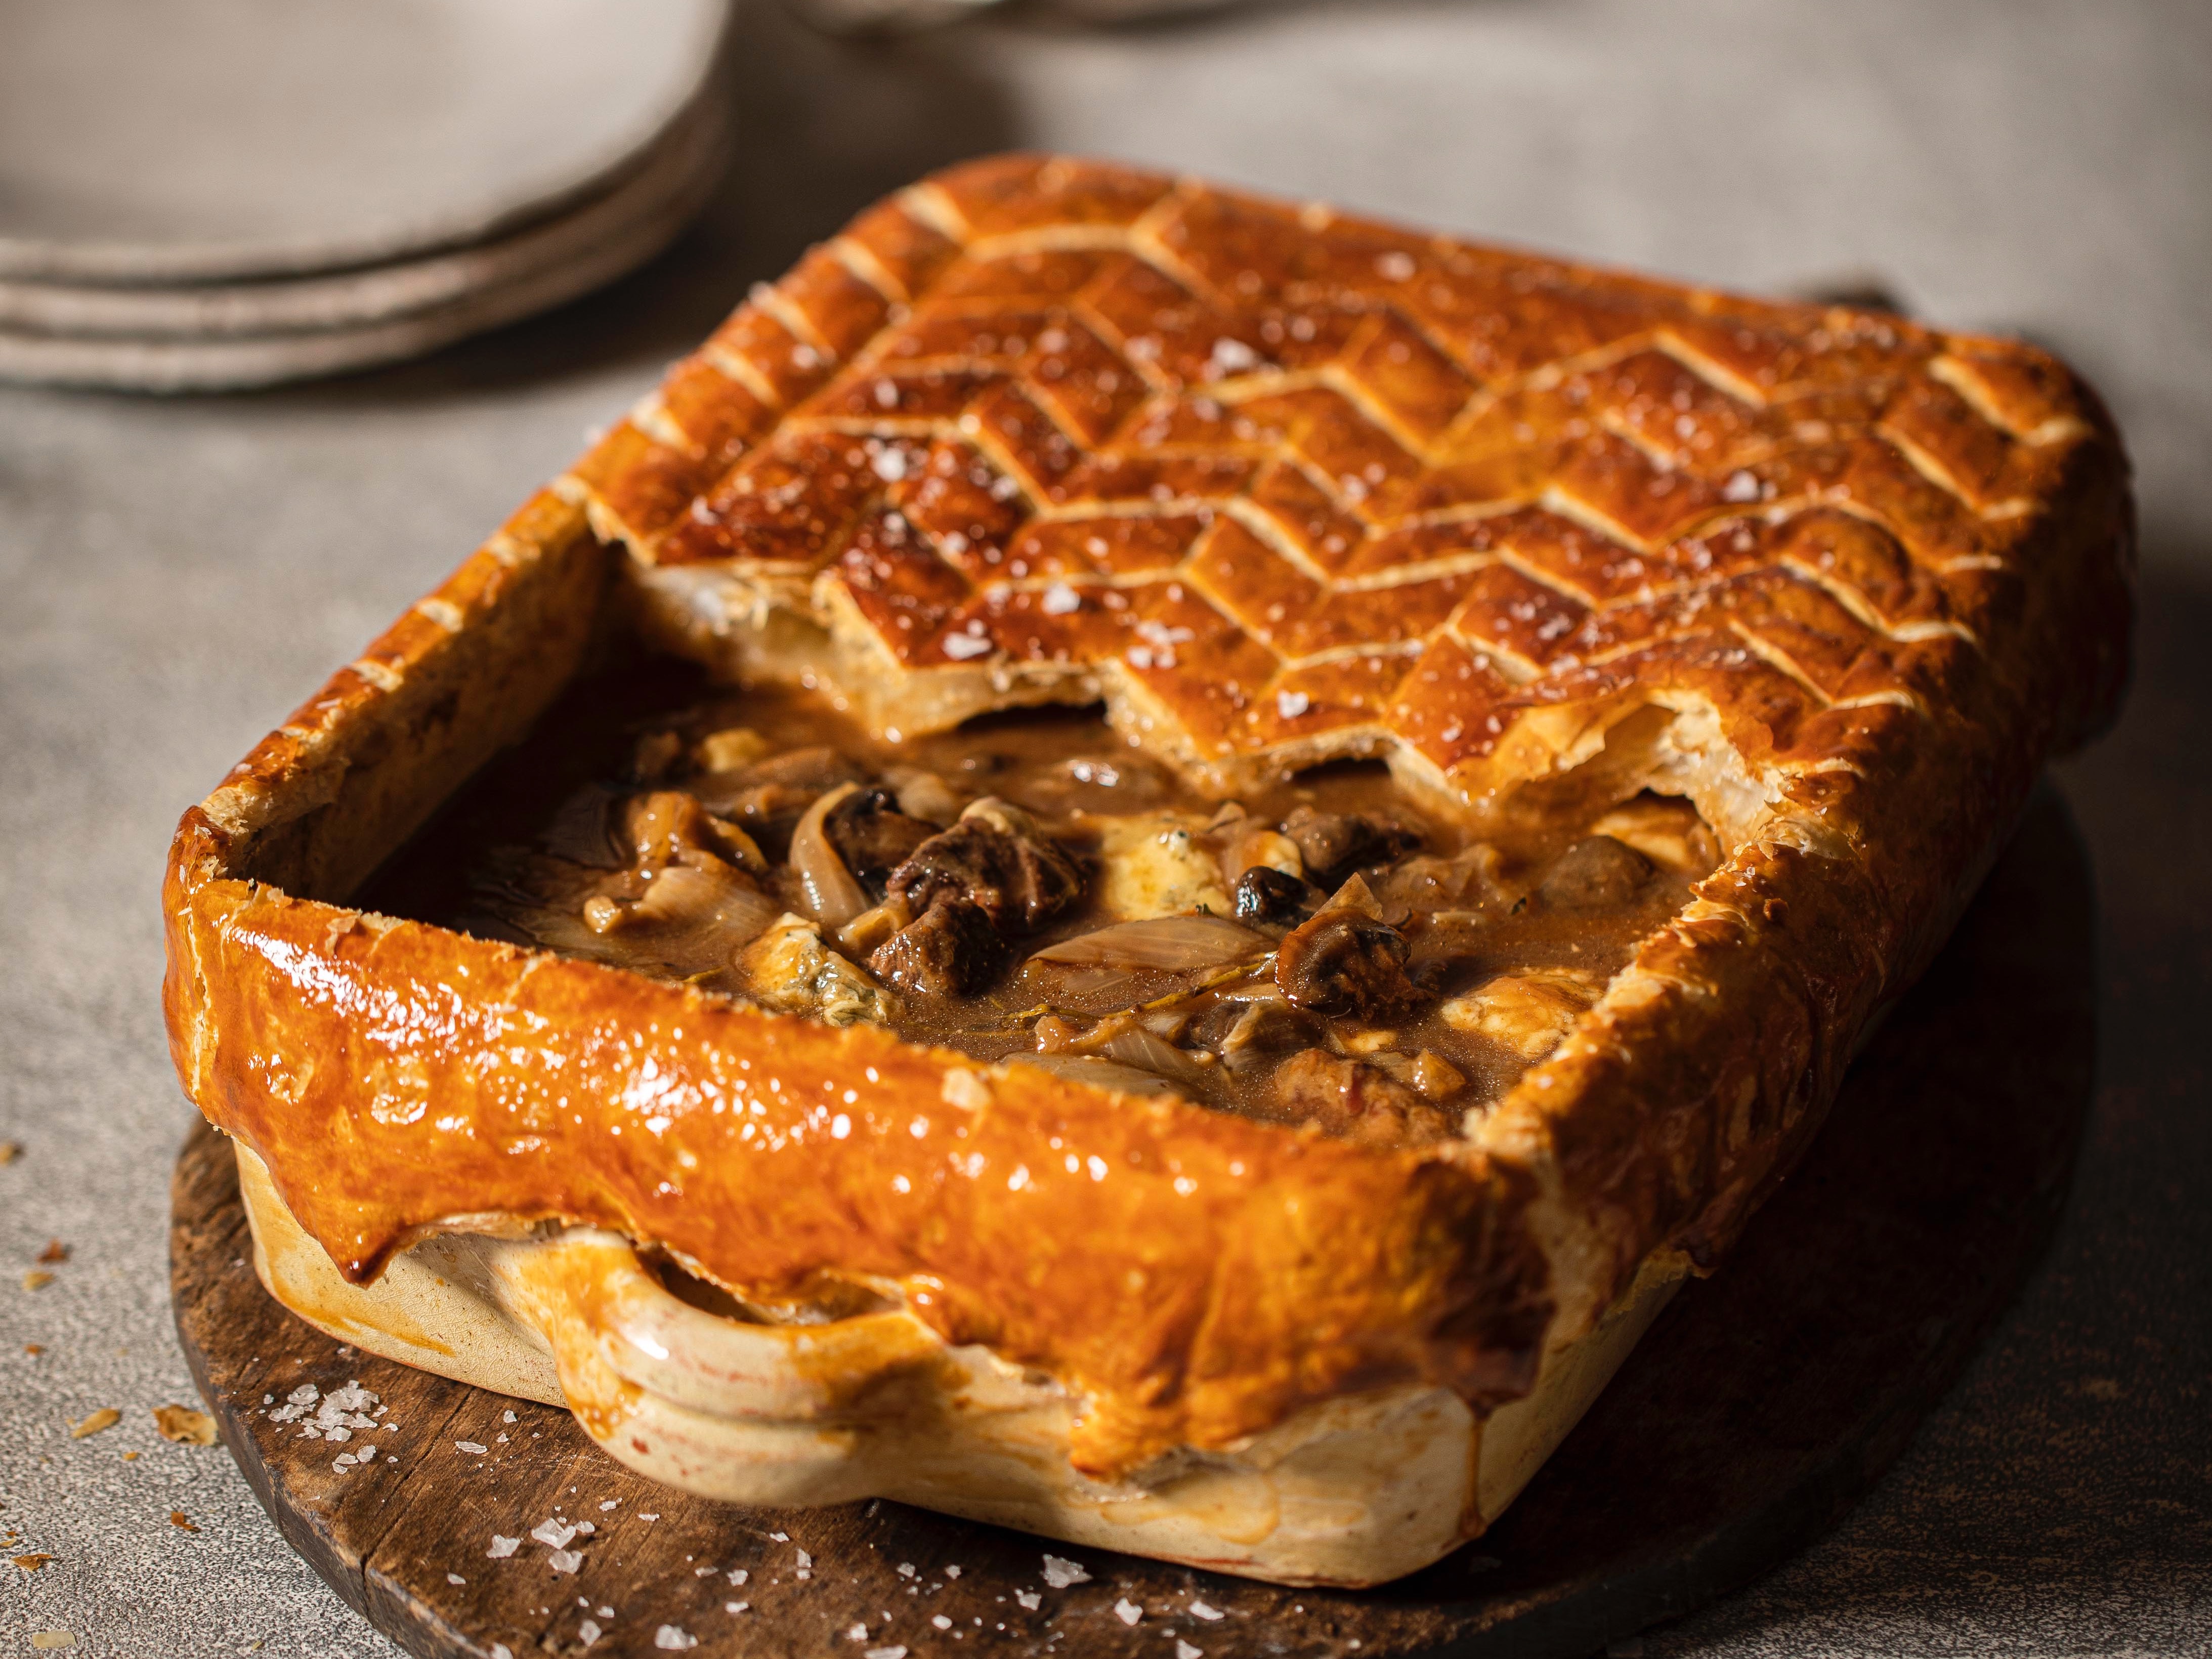 Beef and Onion Pie Recipe 